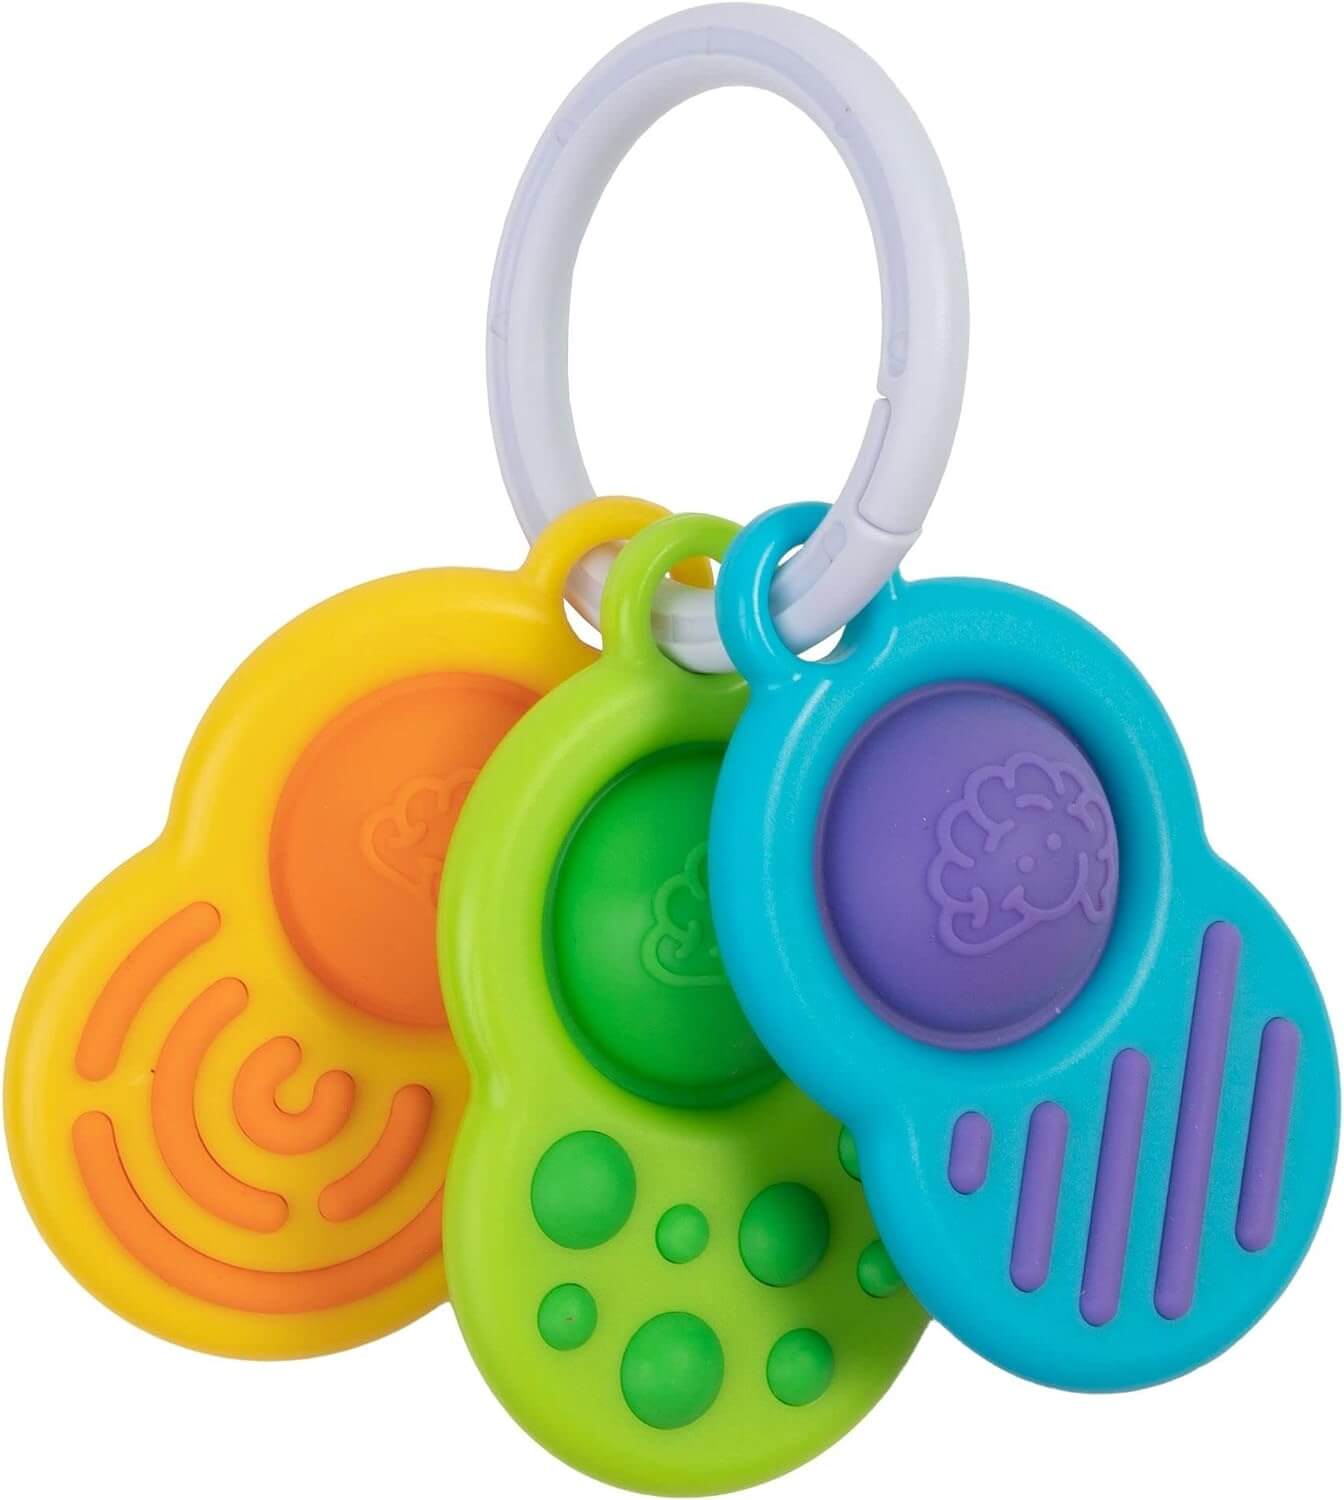 Dimpl Clutch Baby Toy and Fidget